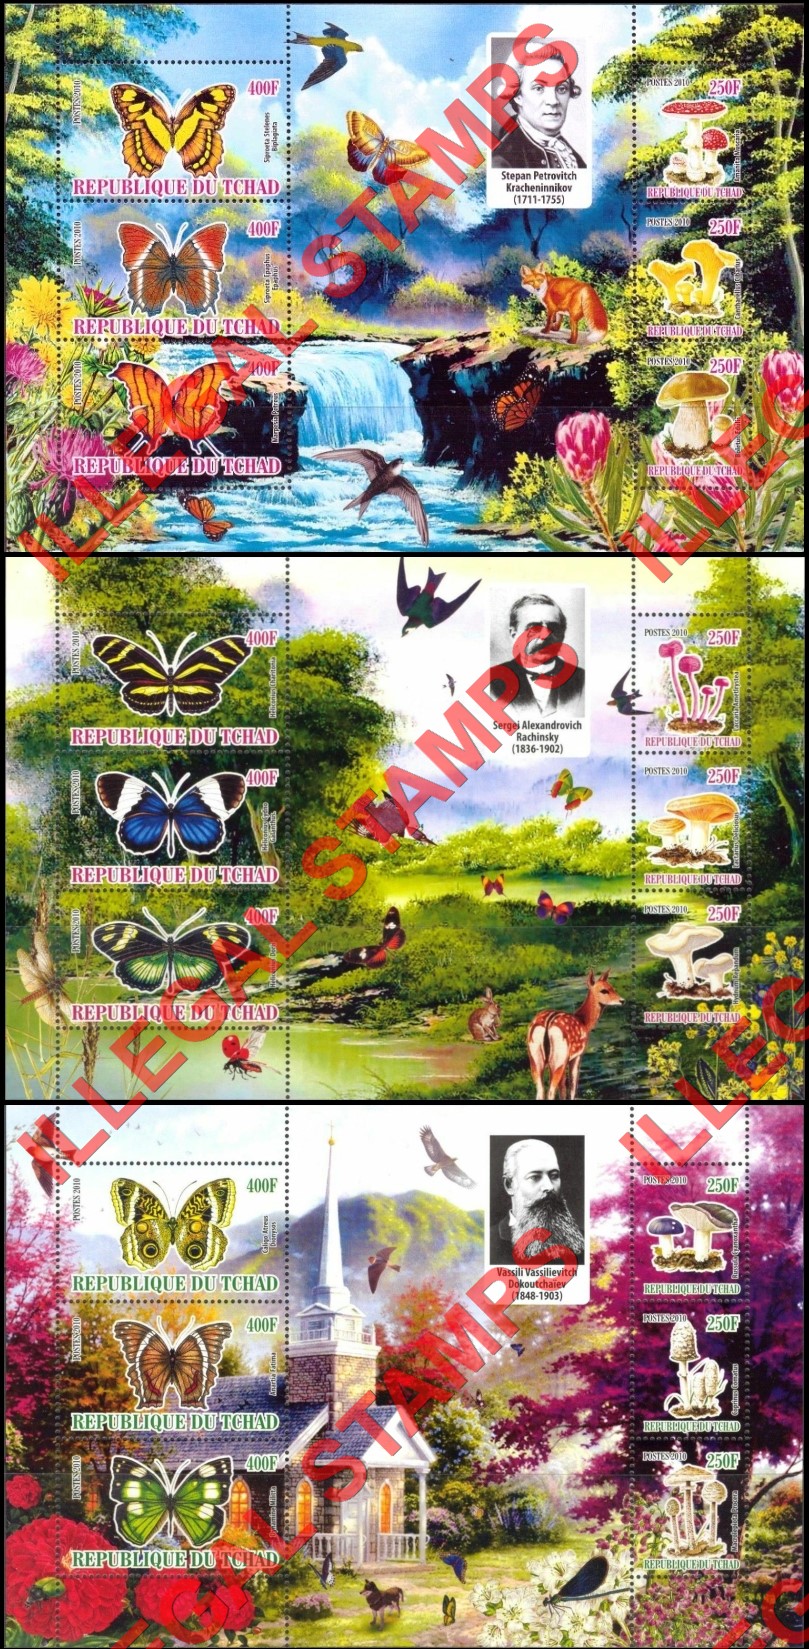 Chad 2010 Butterflies and Mushrooms Illegal Stamps in Souvenir Sheets of 6 (Part 5)